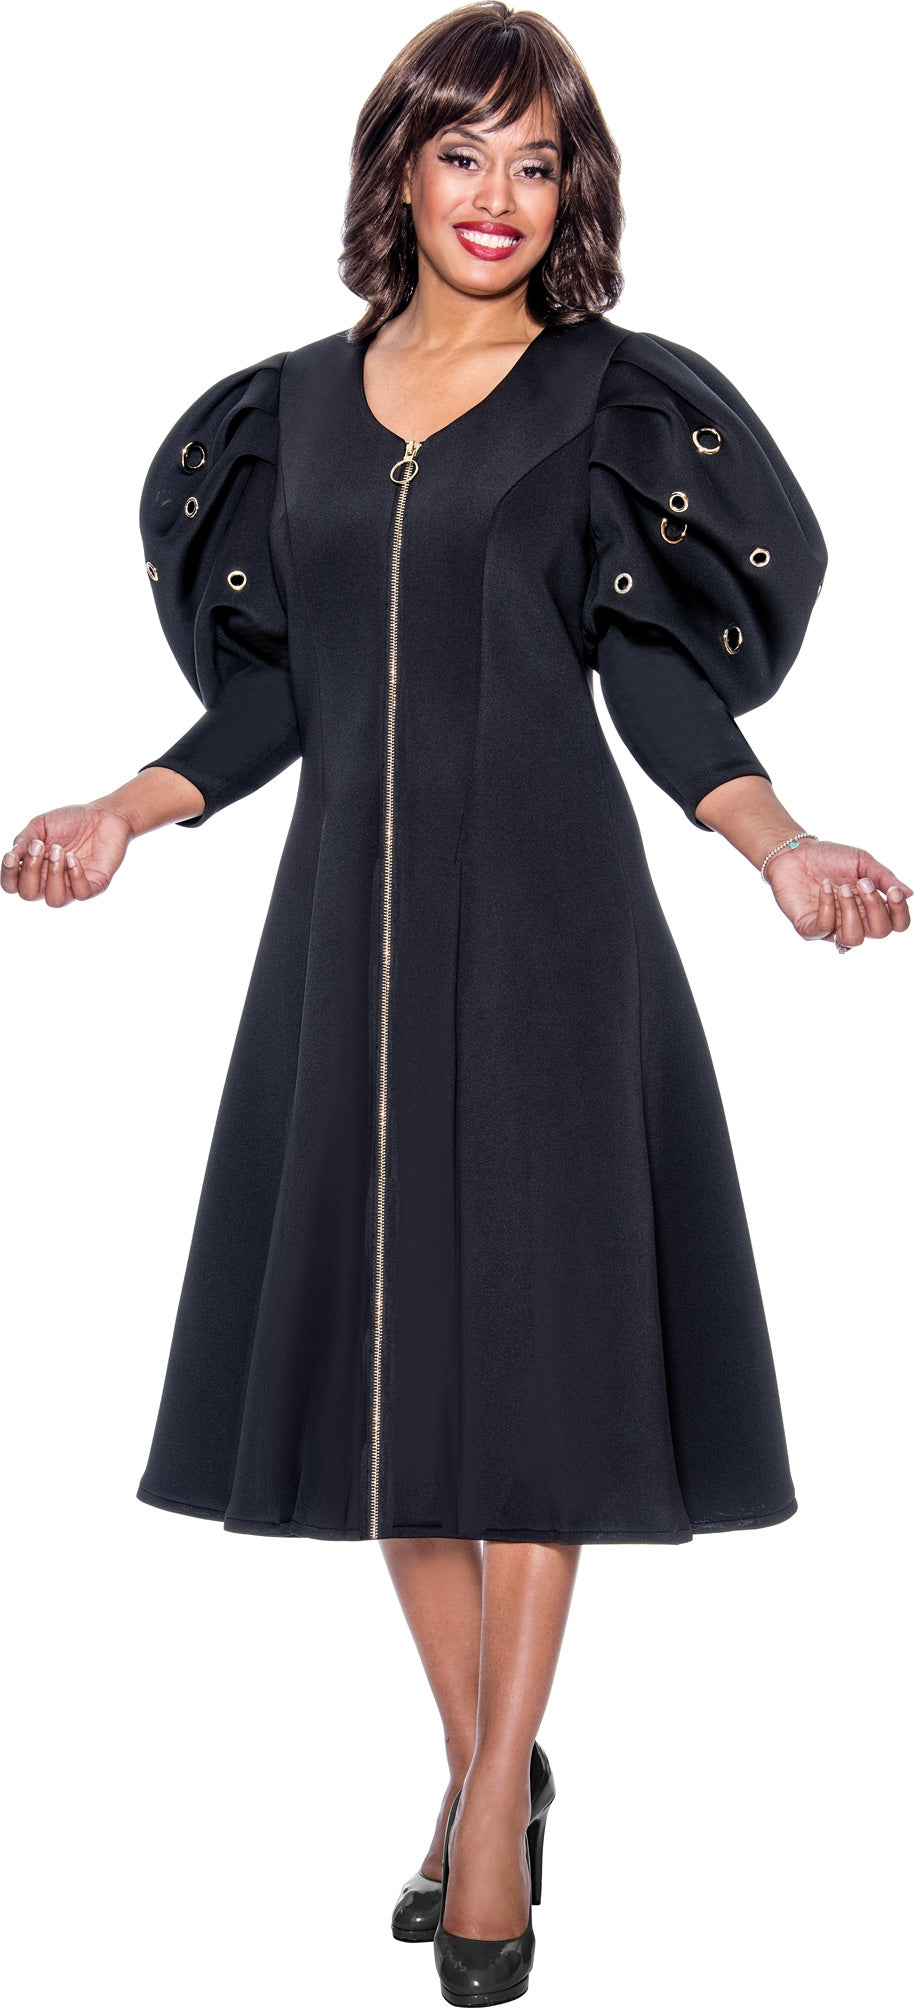 Church Dress By Nubiano 1011C-Black - Church Suits For Less